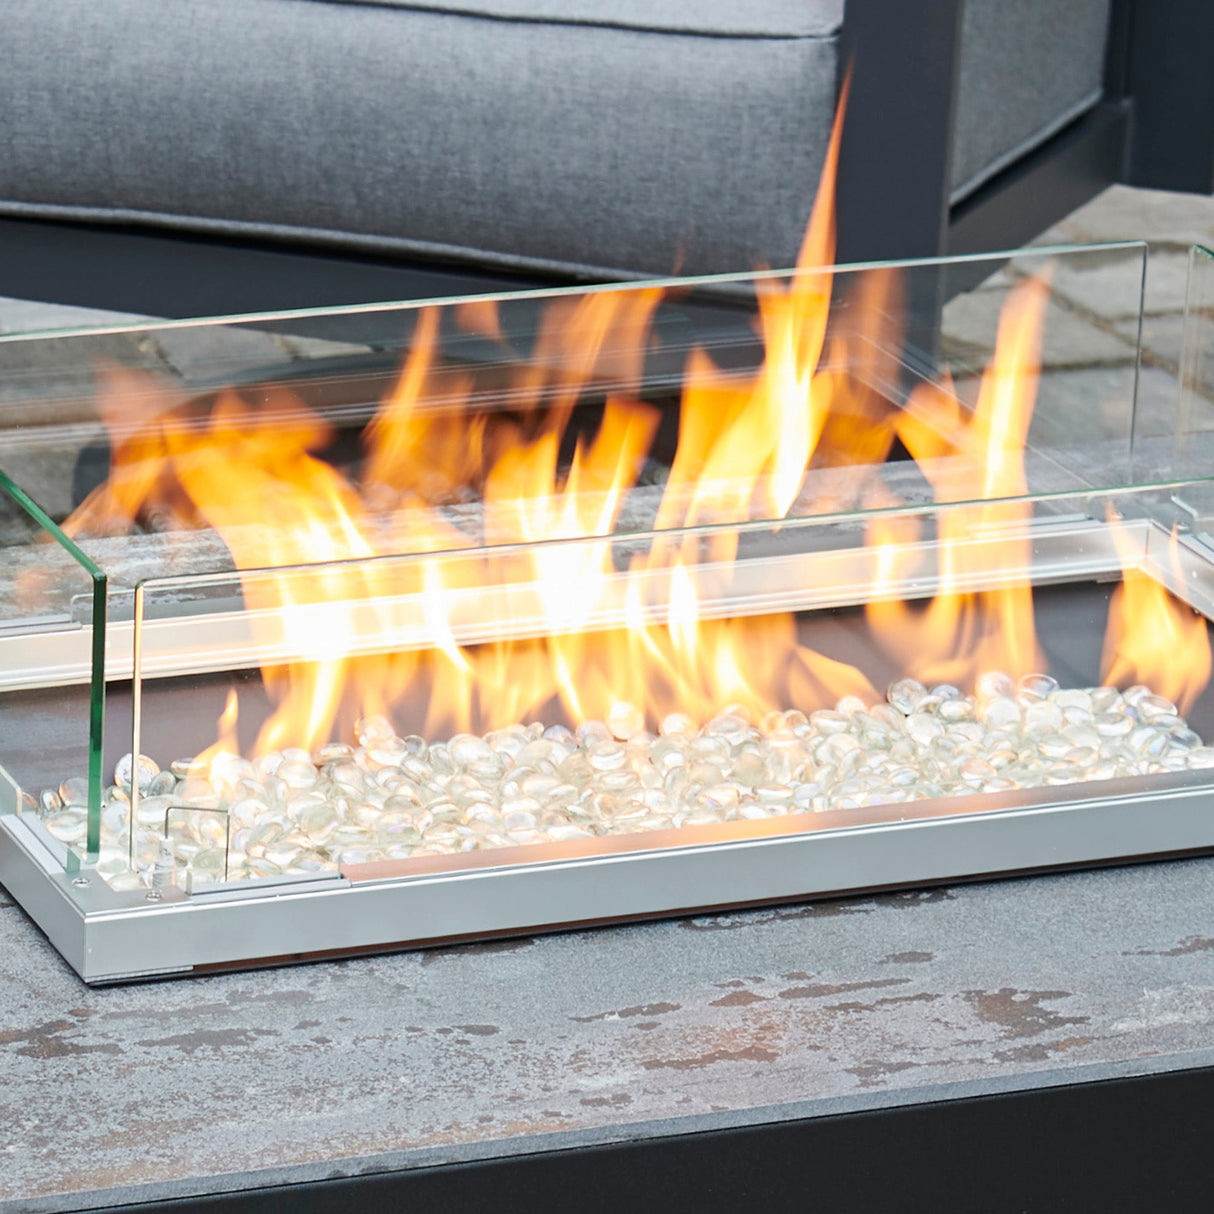 The Linear Folding Glass Wind Guard with a large flame in an outdoor patio setup